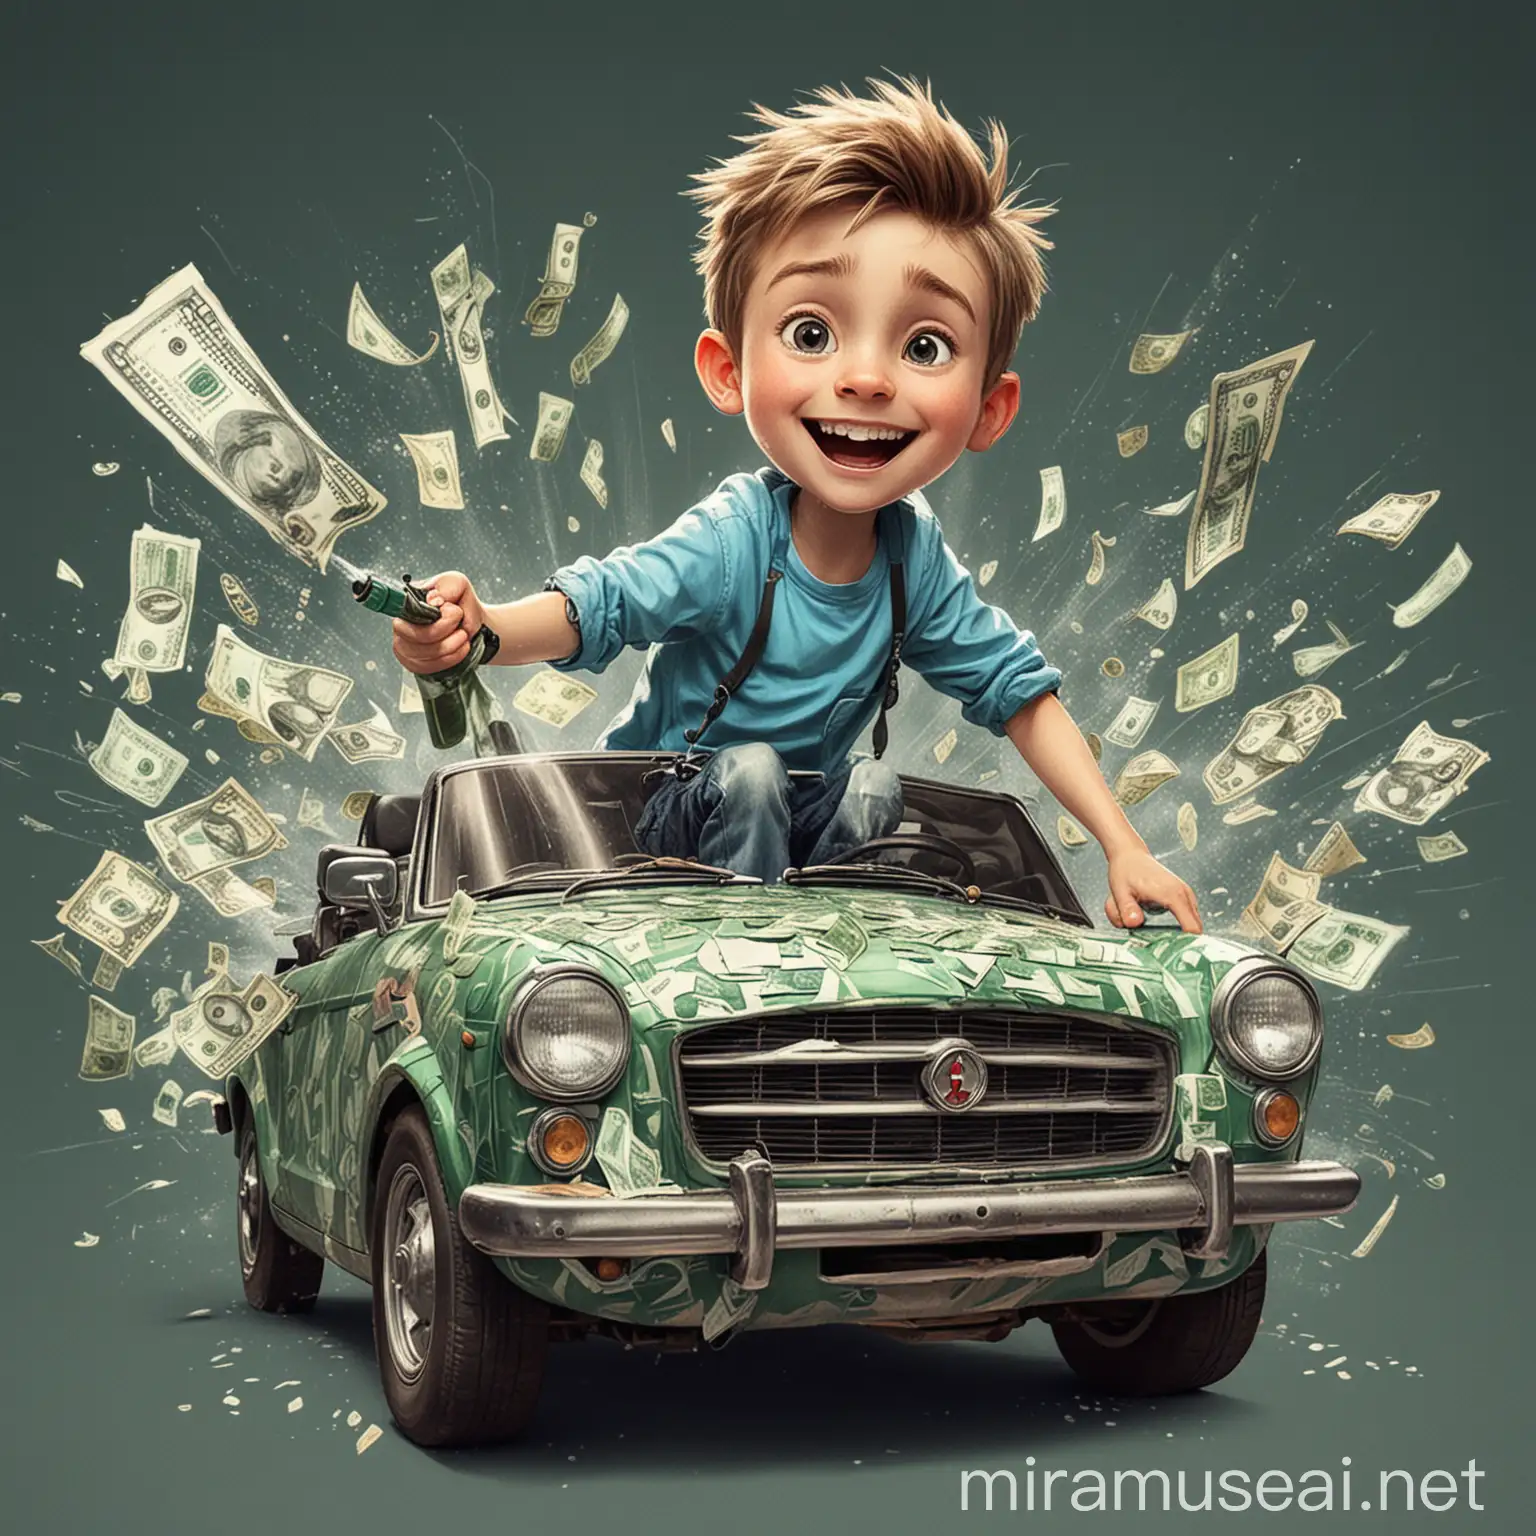 Draw a boy driving a car and spraying money